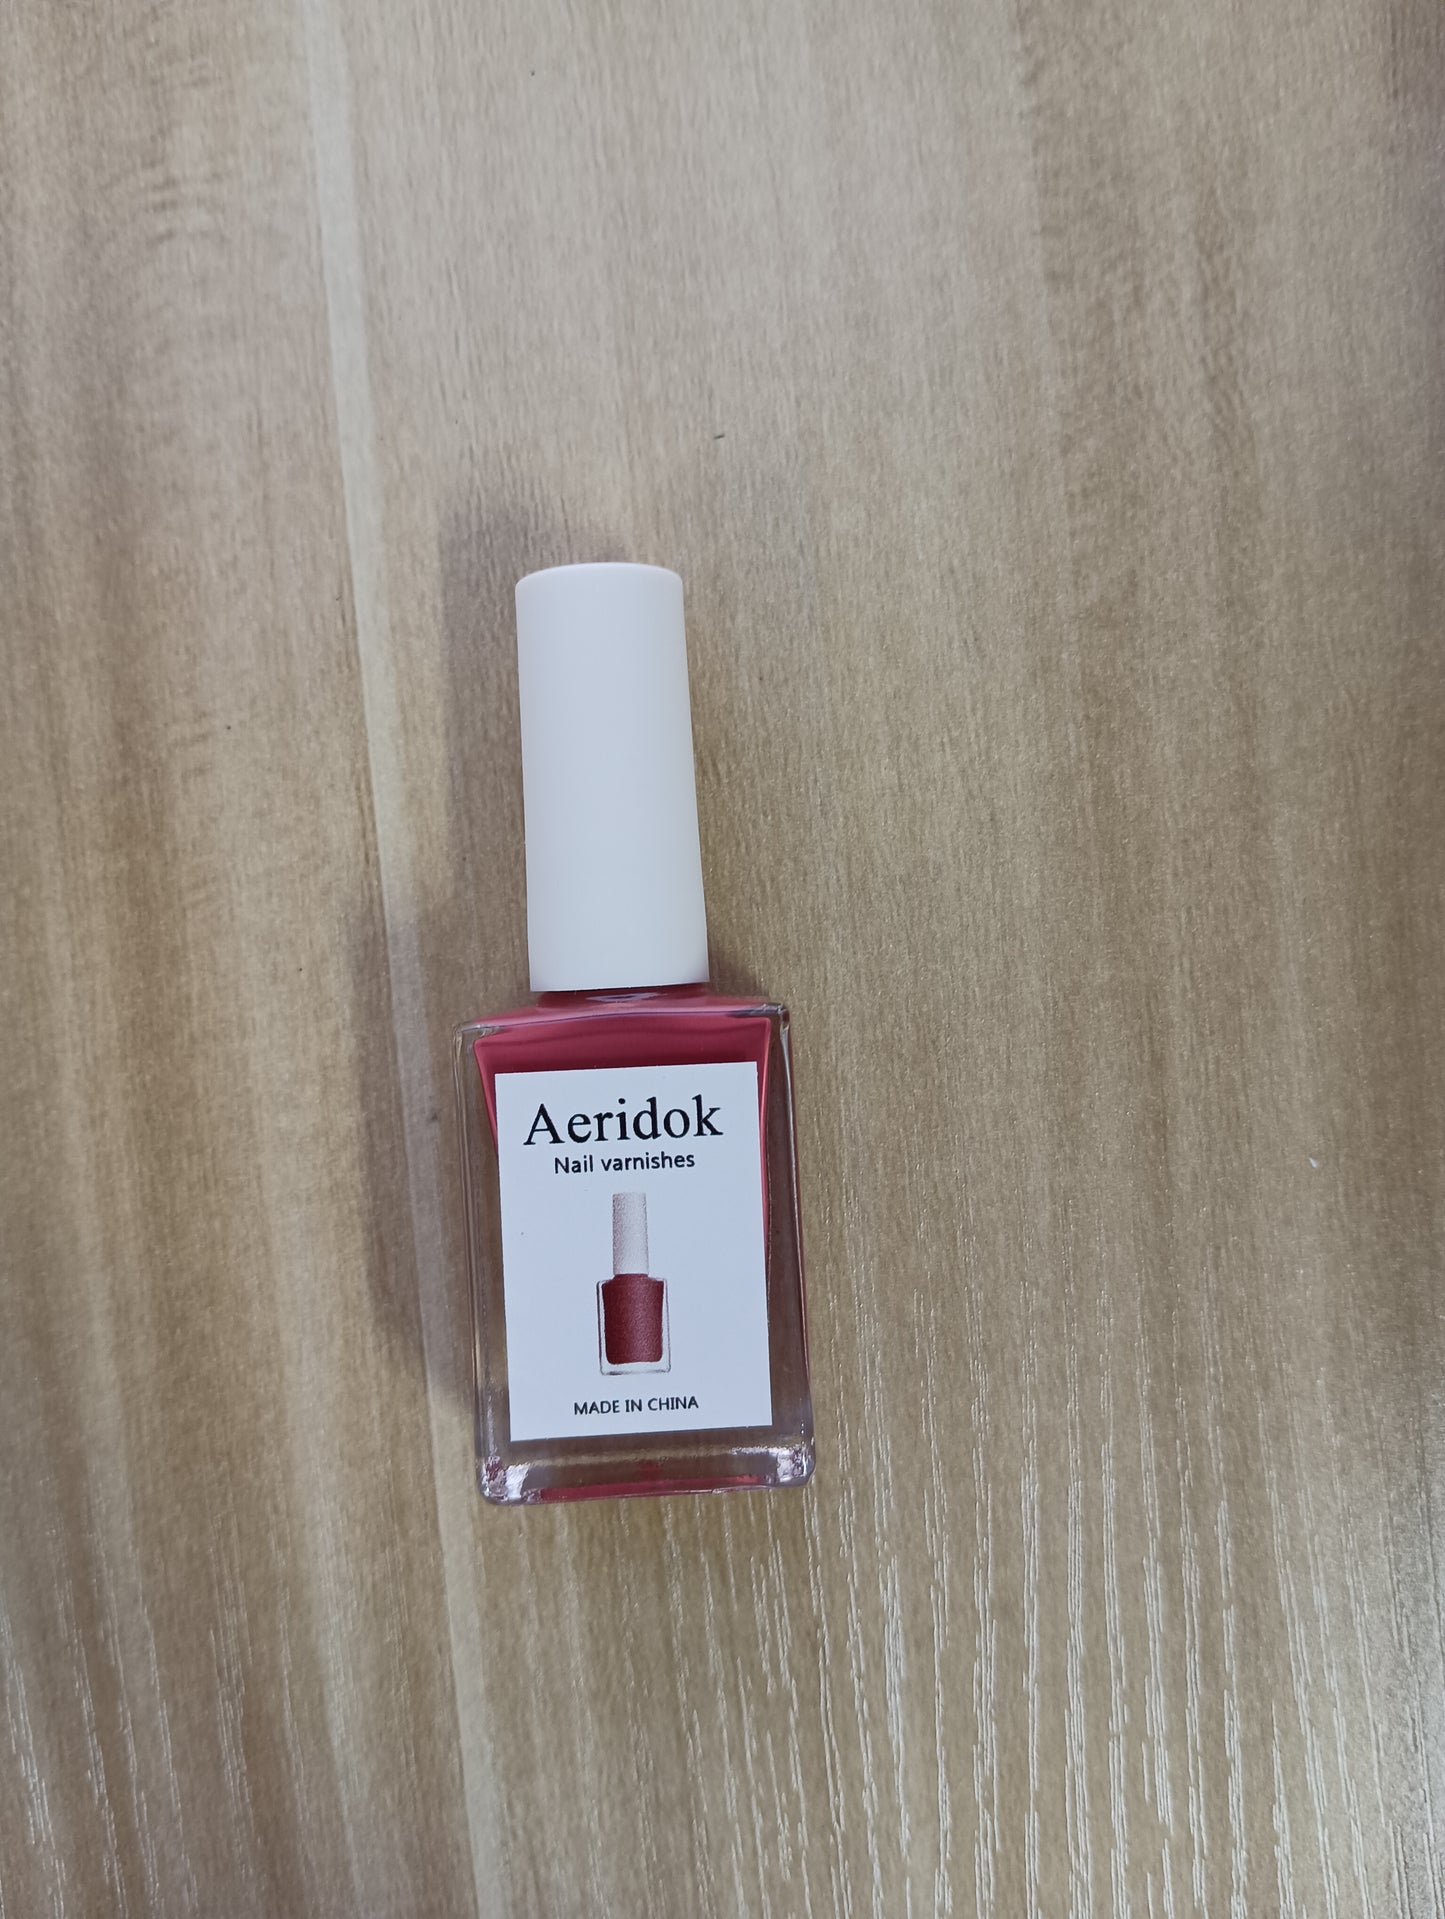 Aeridok nail varnishes water-based tearable nail varnishes no baking students fashion trend frosted durable high quality elegant nail varnishes